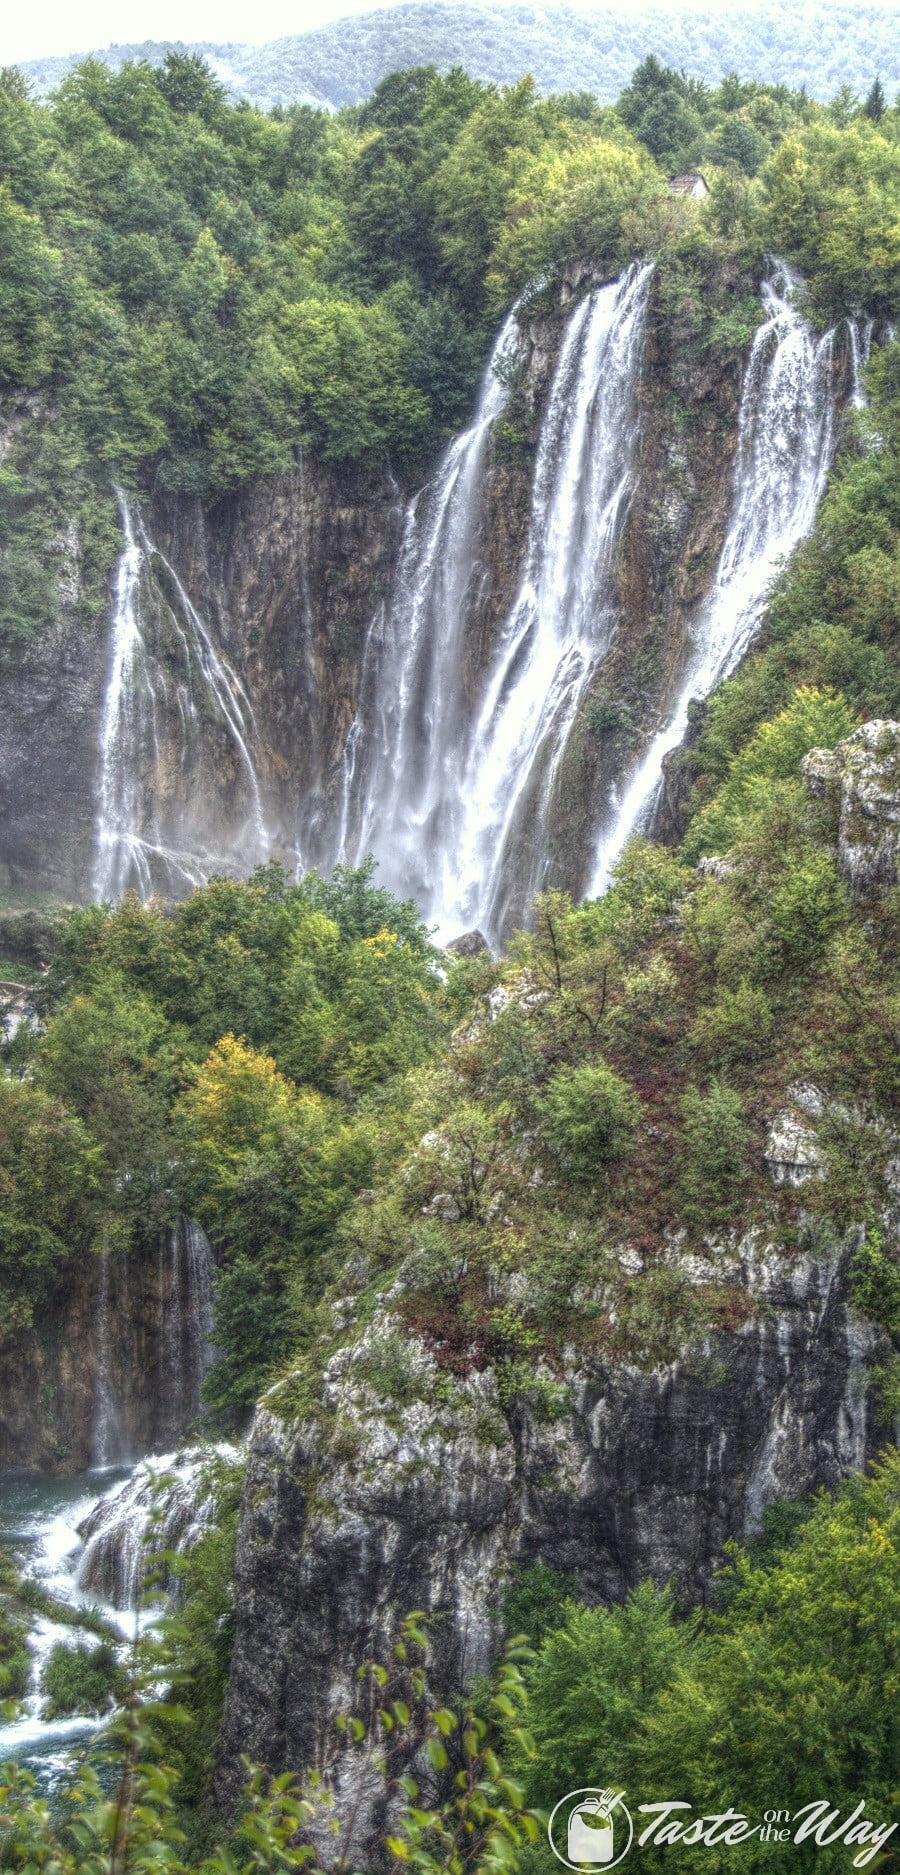 One of the top #tips visiting #Plitvice Lakes National Park in #Croatia is to get closer to the waterfalls. Check out for more! #travel #photography @tasteontheway